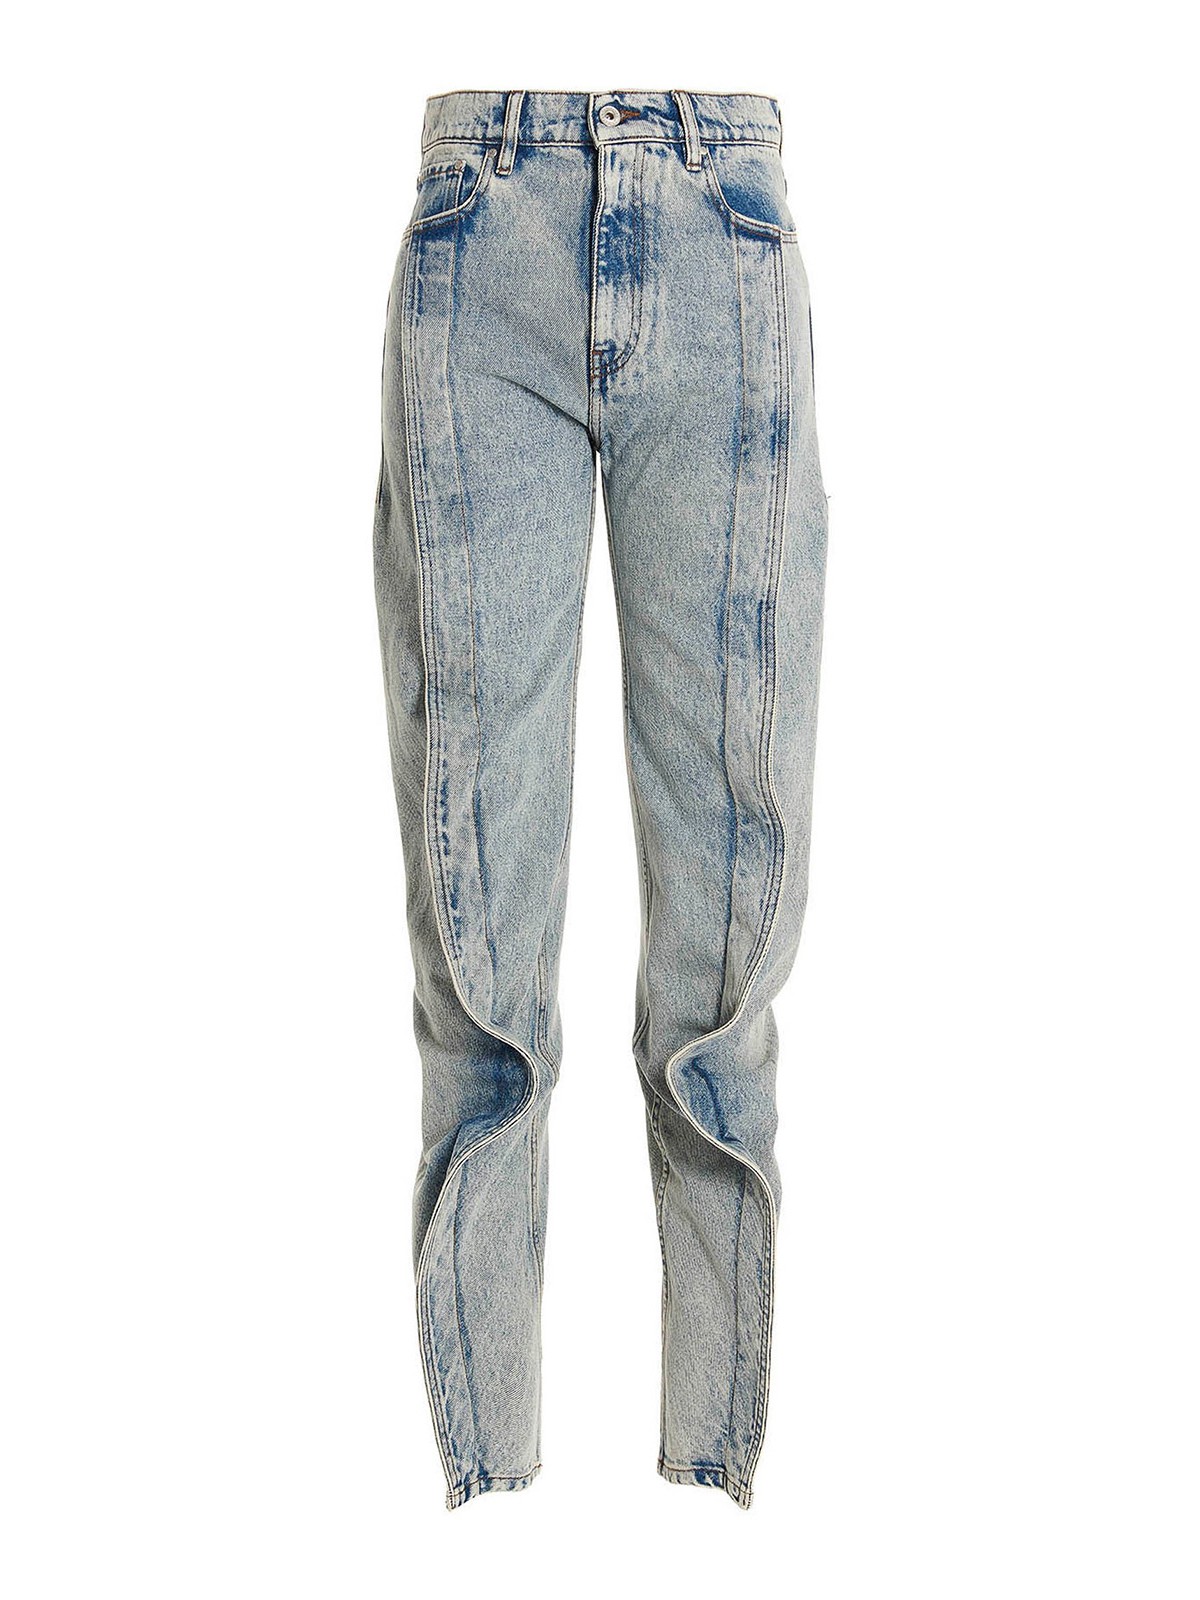 Y/project 22fw banana jeans 28 - www.csharp-examples.net